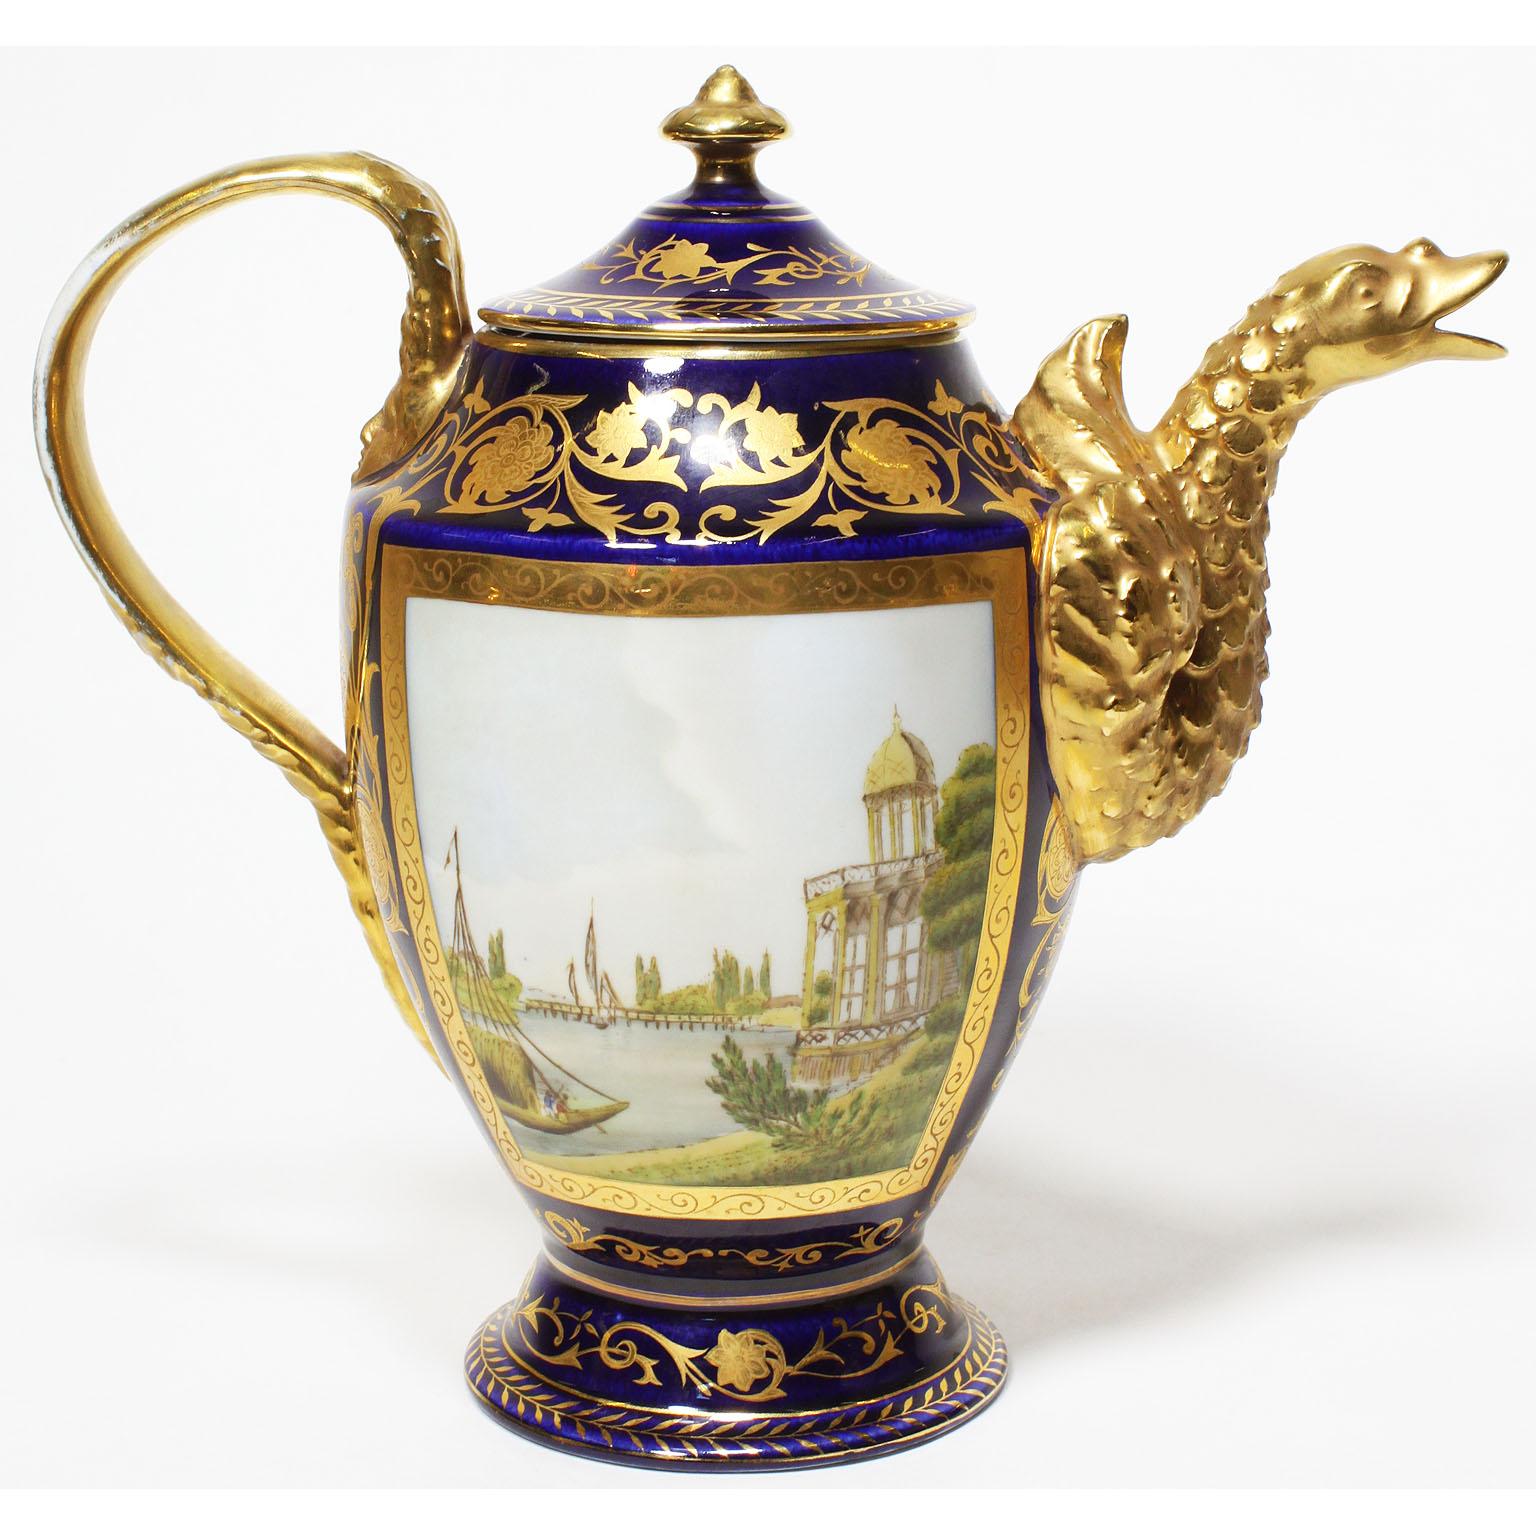 A very fine 19th century Berlin KPM Porcelain Royal five-piece cobalt-blue and 24-carat gold parcel-gilt coffee set. The finely painted and decorated two-serving suite comprising of a coffee pot, a sugar-bowl, a creamer and two coffee cups and